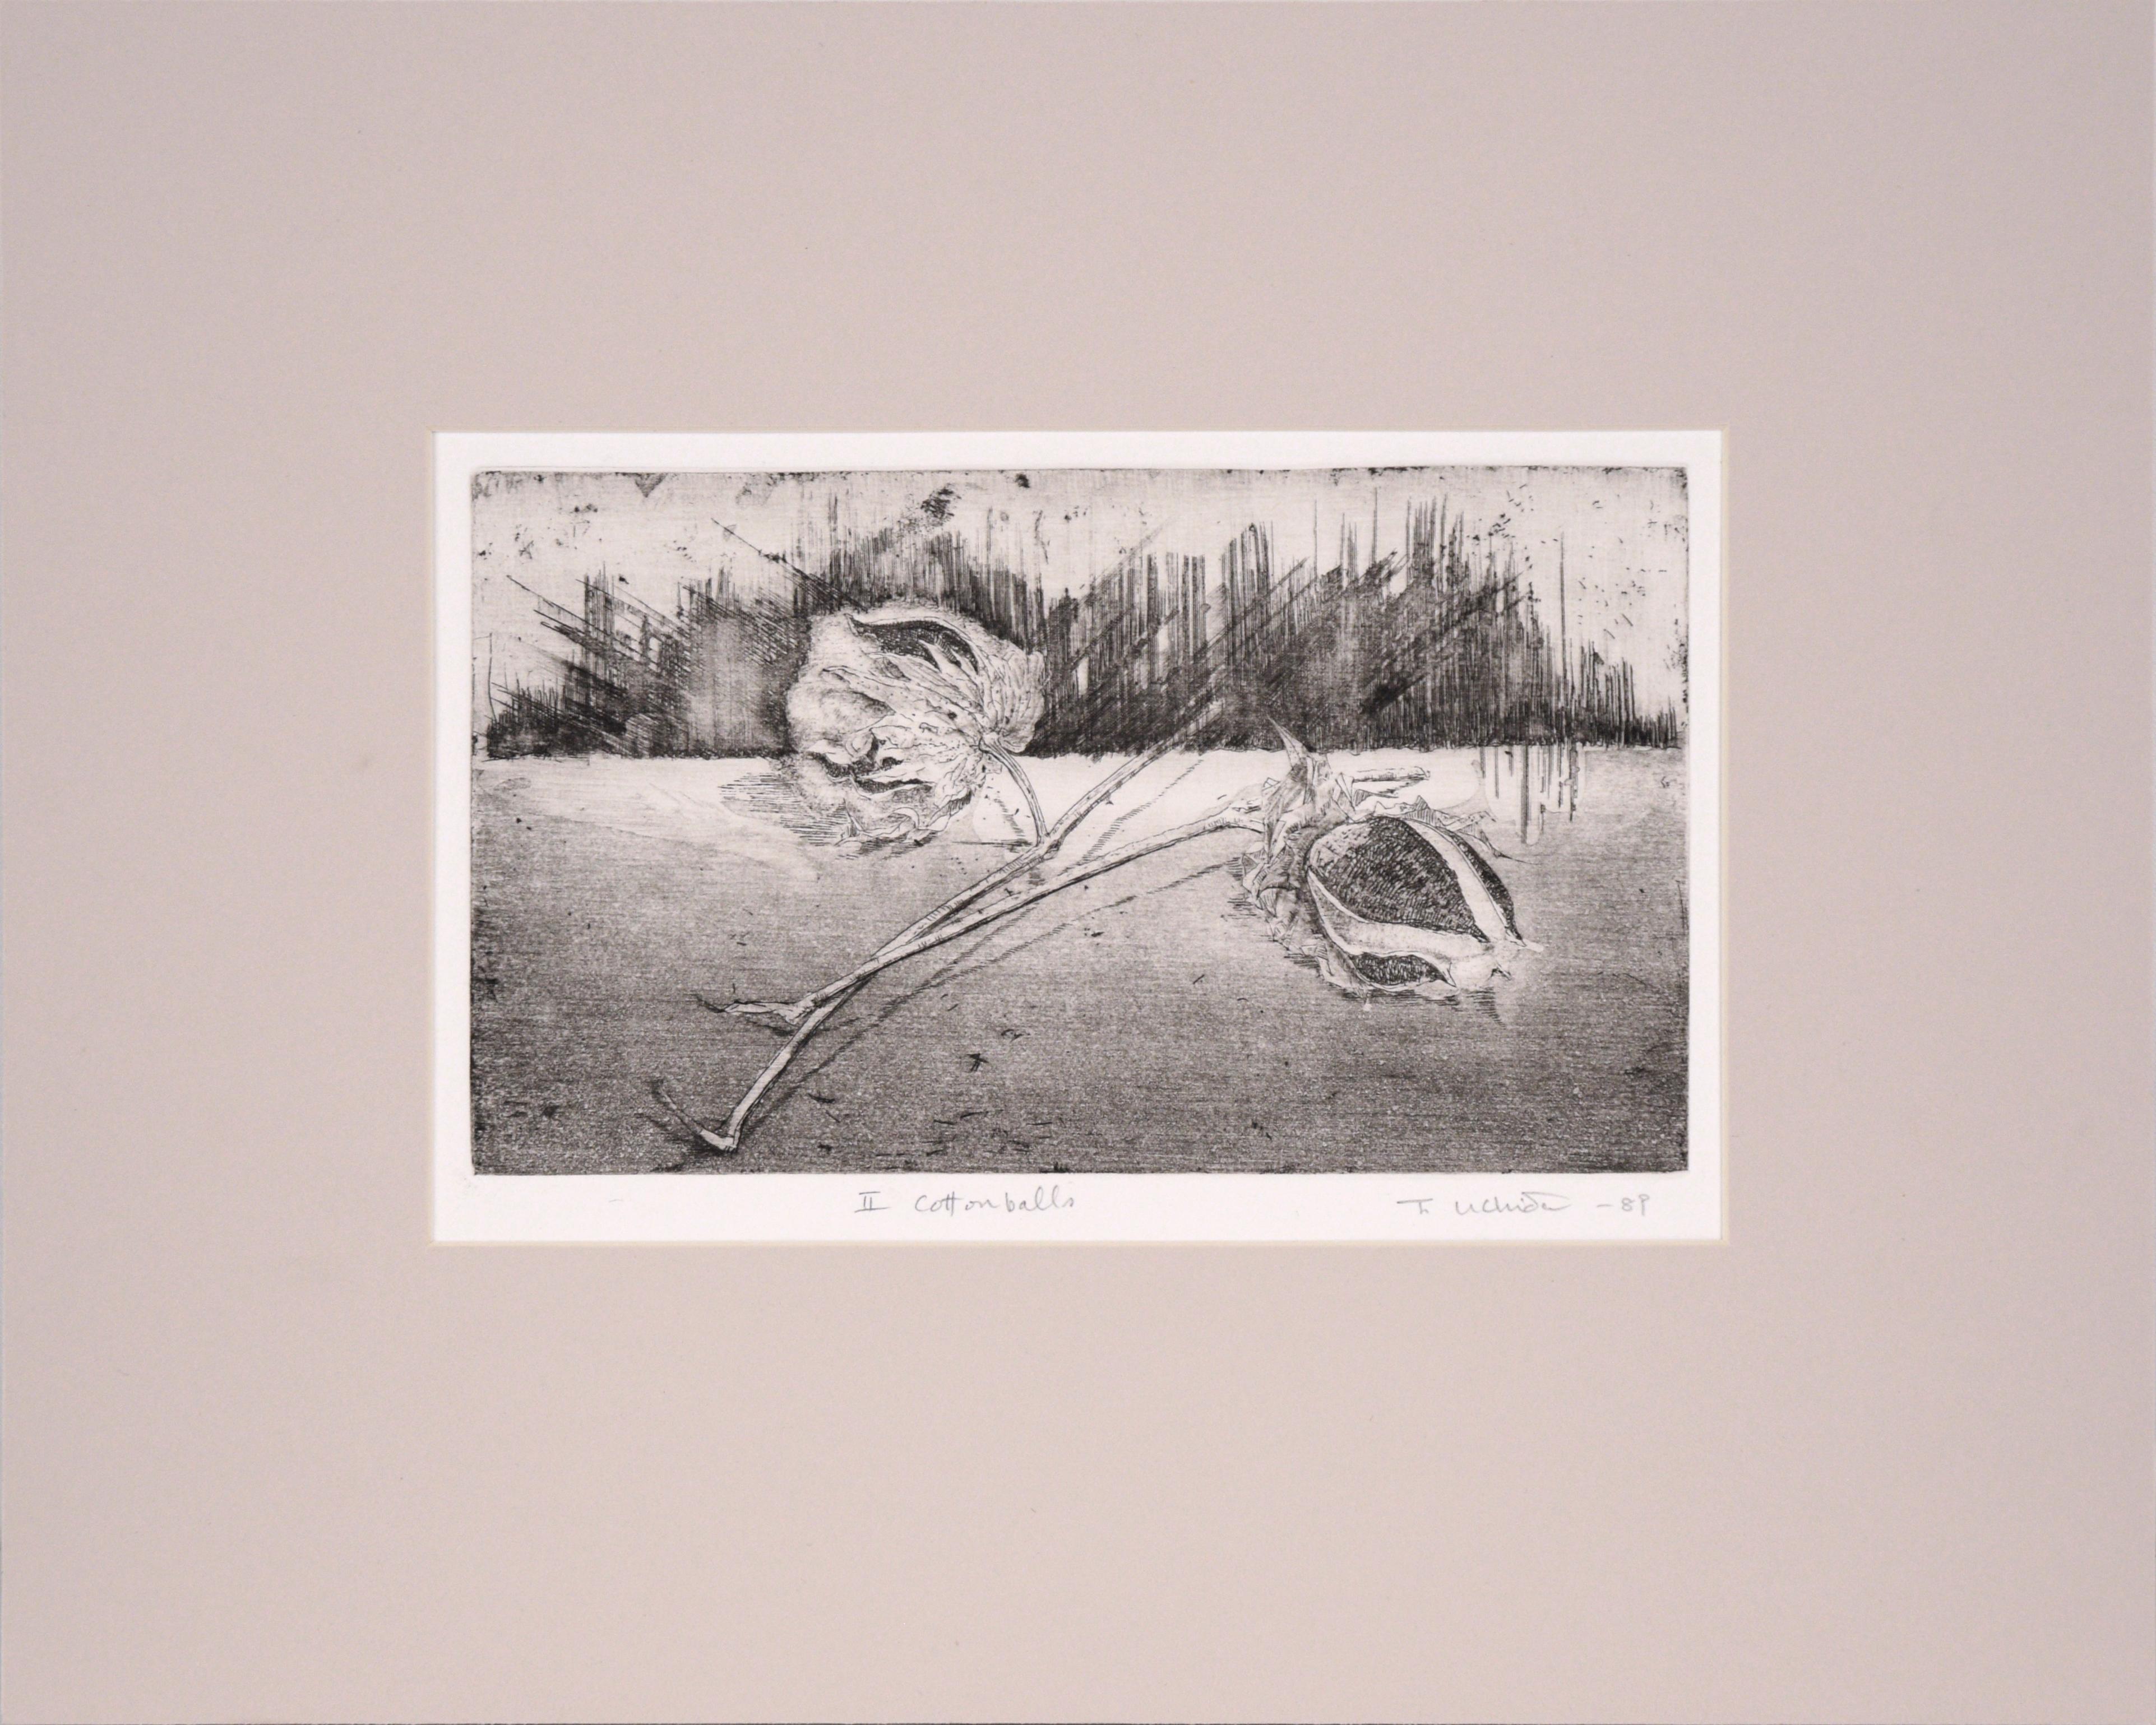 Abstracted drypoint etching by Tomoya Uchida (Japanese, 20th Century). Two cottonballs on the stalk sit in a minimalist space.

Titled "II Cottonballs" along the bottom edge.
Signed and dated "T. Uchida - 89" in the lower right corner.
Presented in